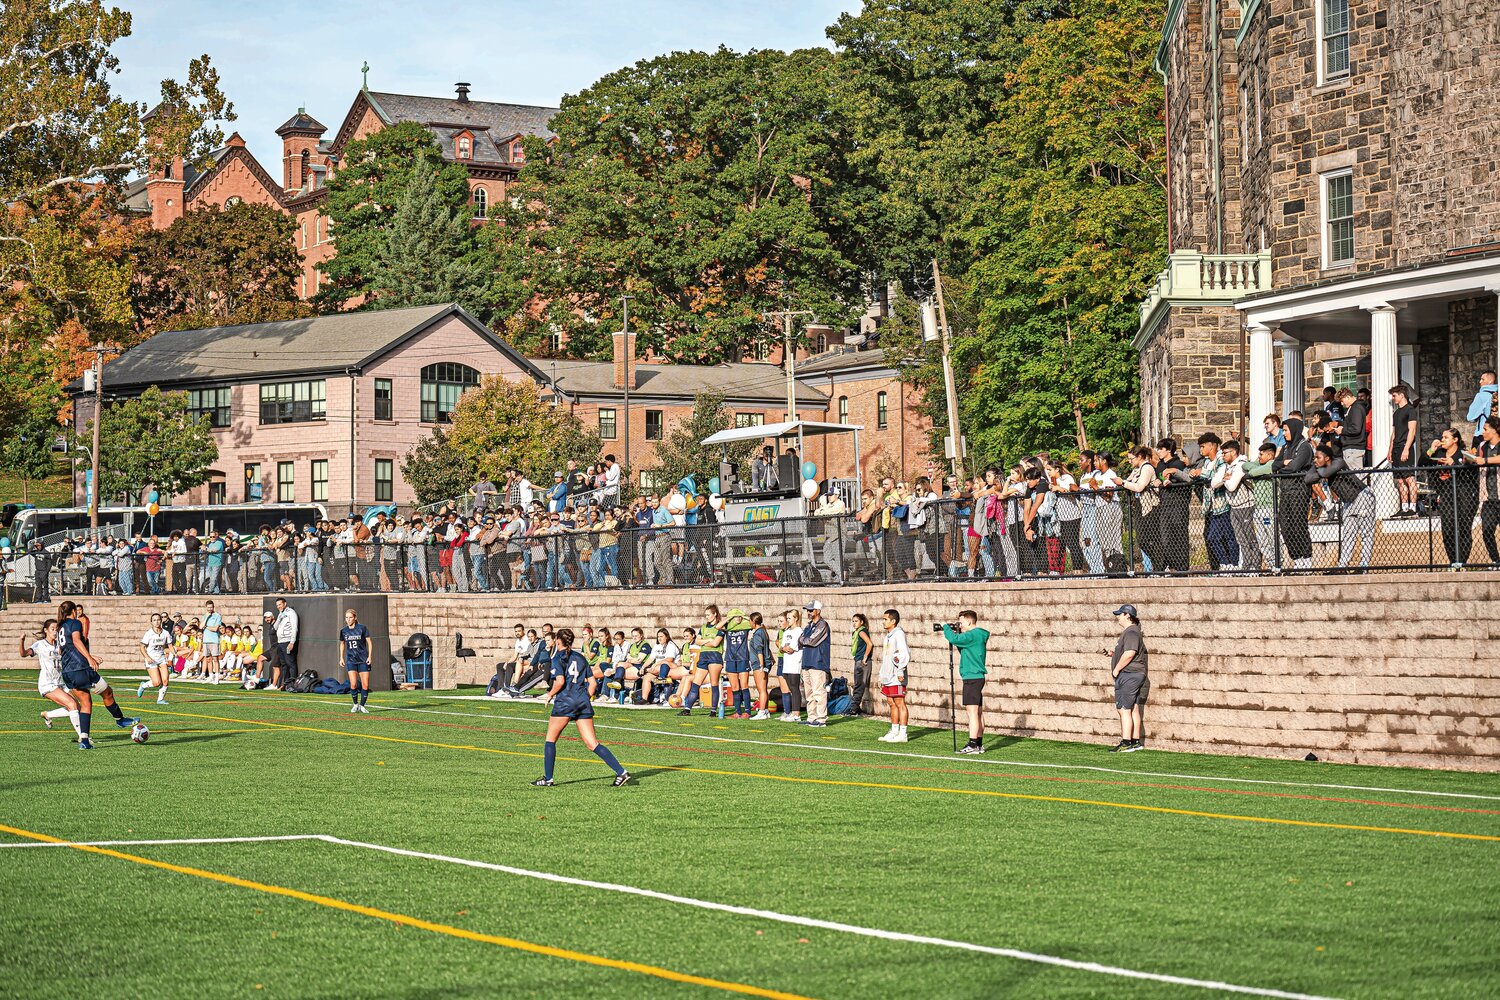 The sights and scenes of the neighboring Hudson River are part of the attraction for attending soccer and lacrosse games at Marillac Field on the campus of College of Mount Saint Vincent. However, there is a bigger picture starting to take shape for the Mount’s athletics teams in hopes of maximizing their competitiveness in the Skyline Conference of NCAA Division III.